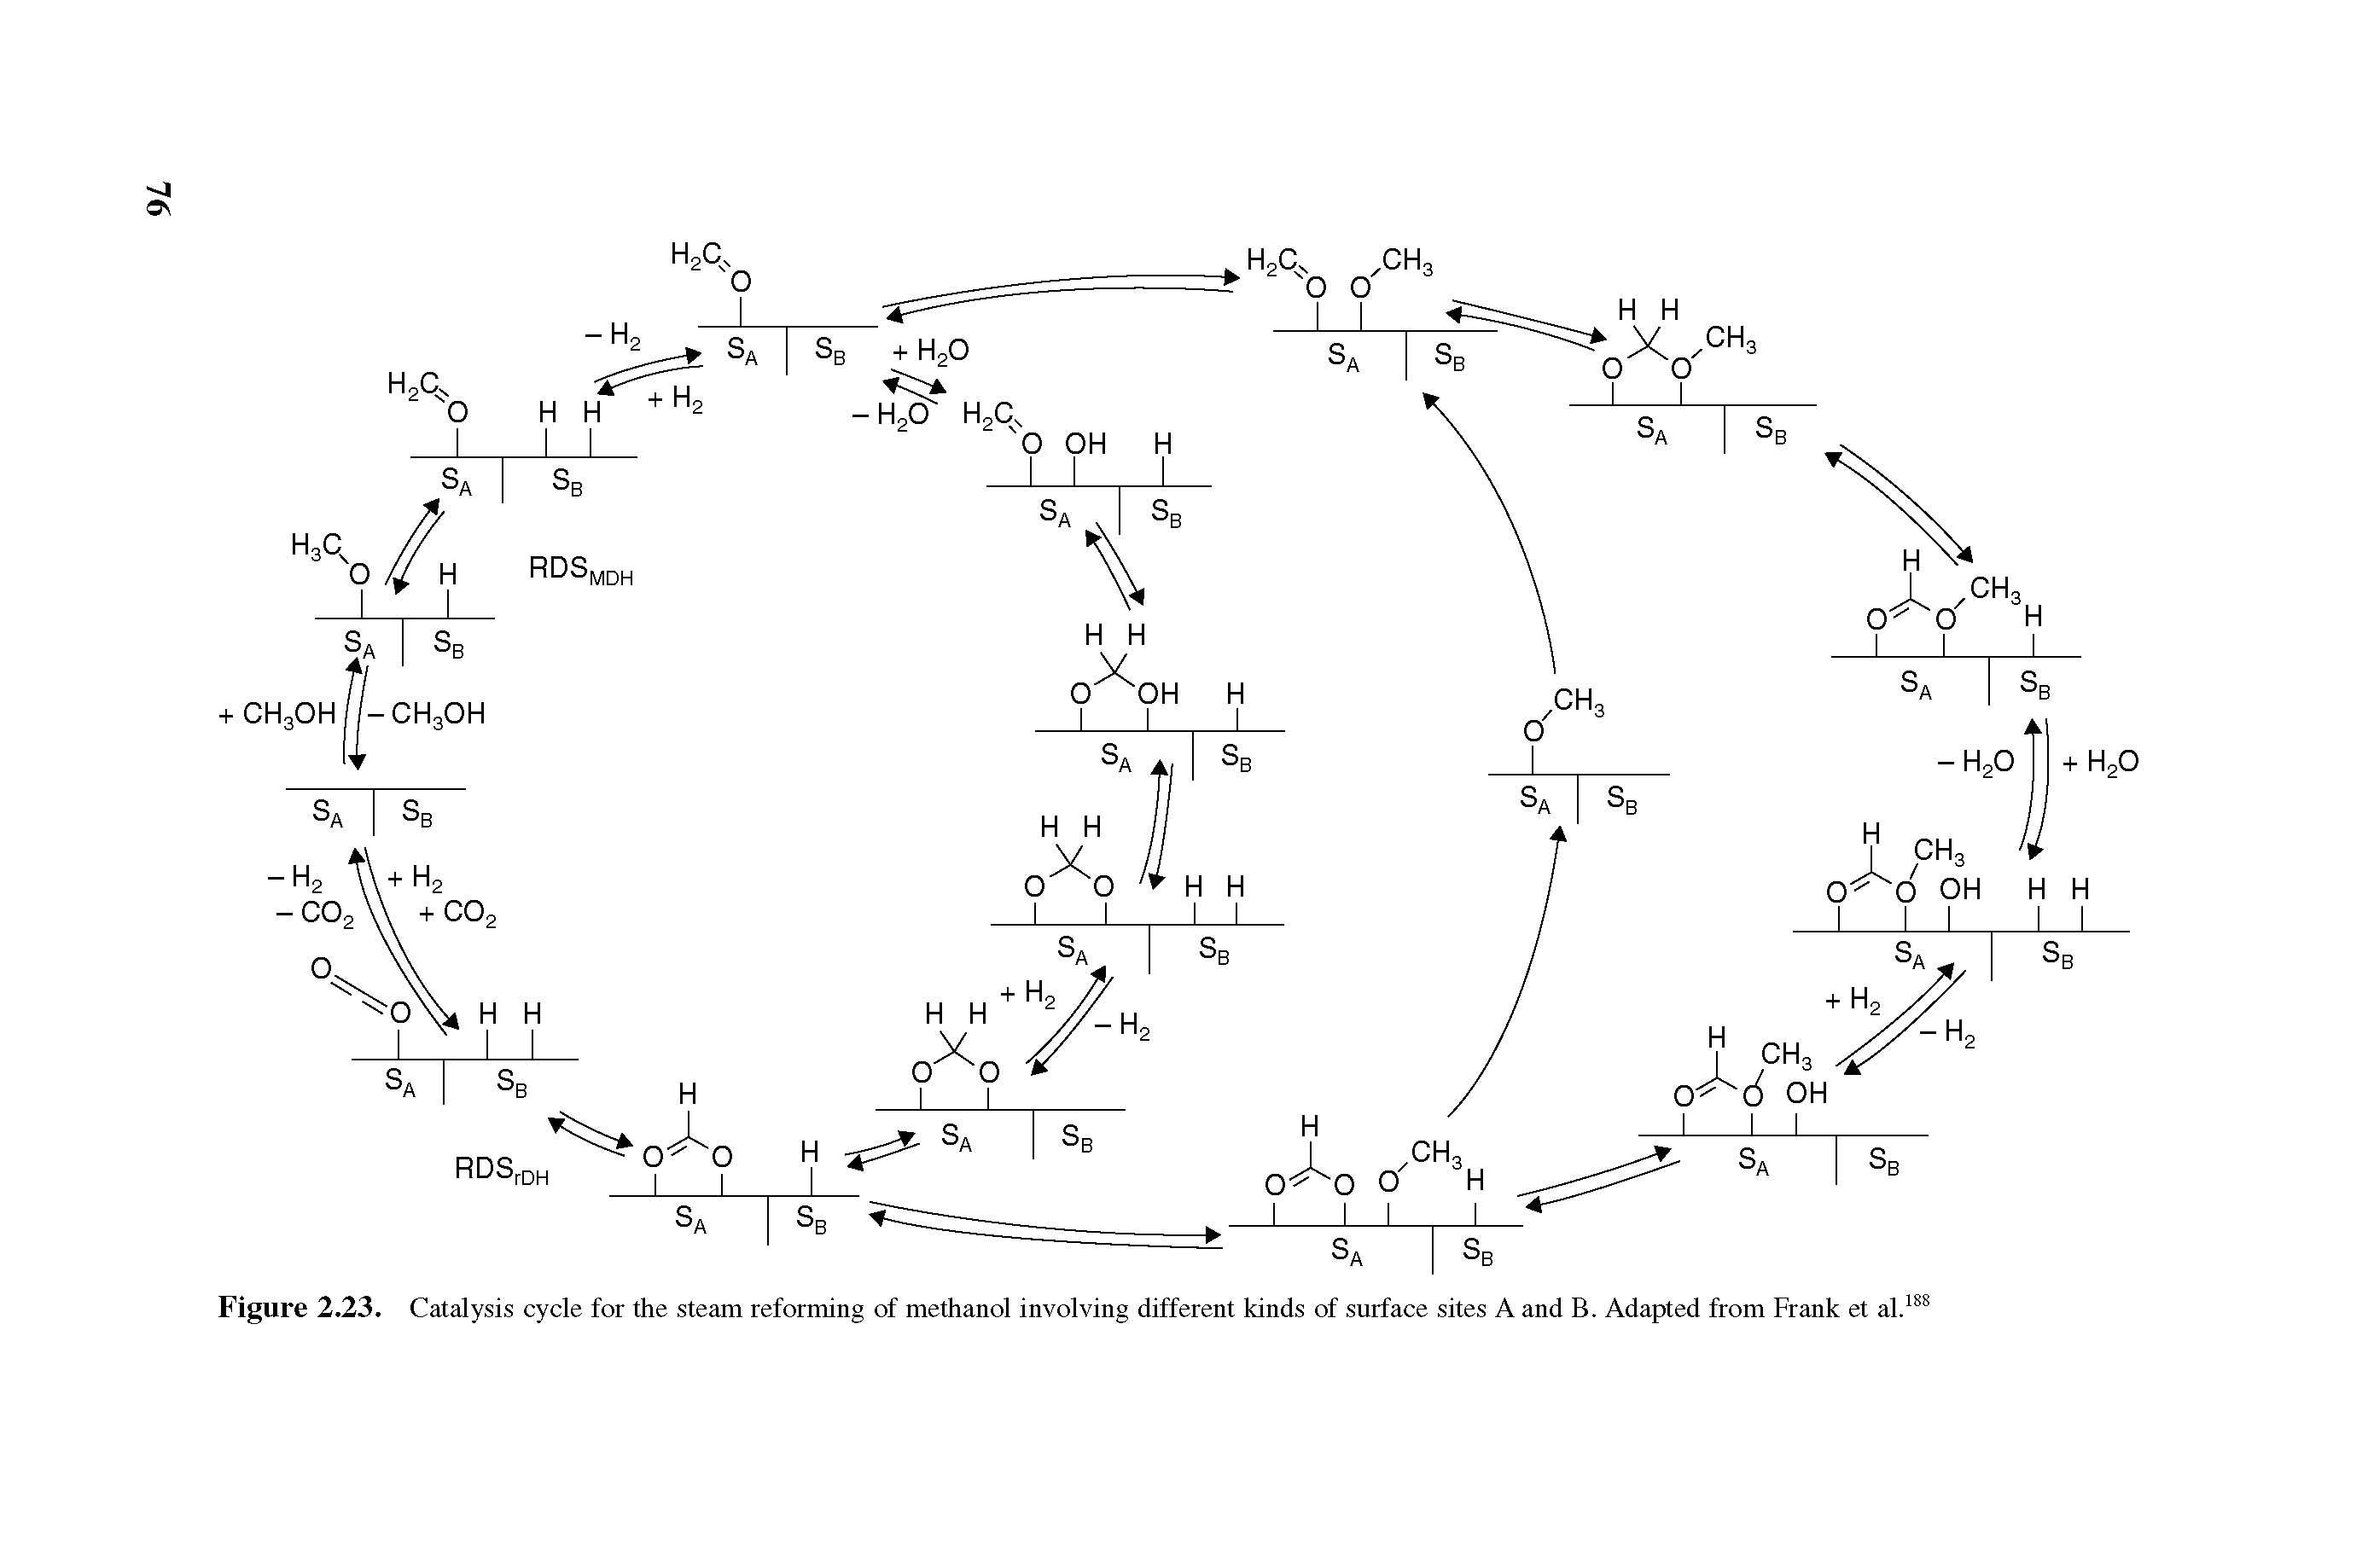 Figure 2.23. Catalysis cycle for the steam reforming of methanol involving different kinds of surface sites A and B. Adapted from Frank et al.188...